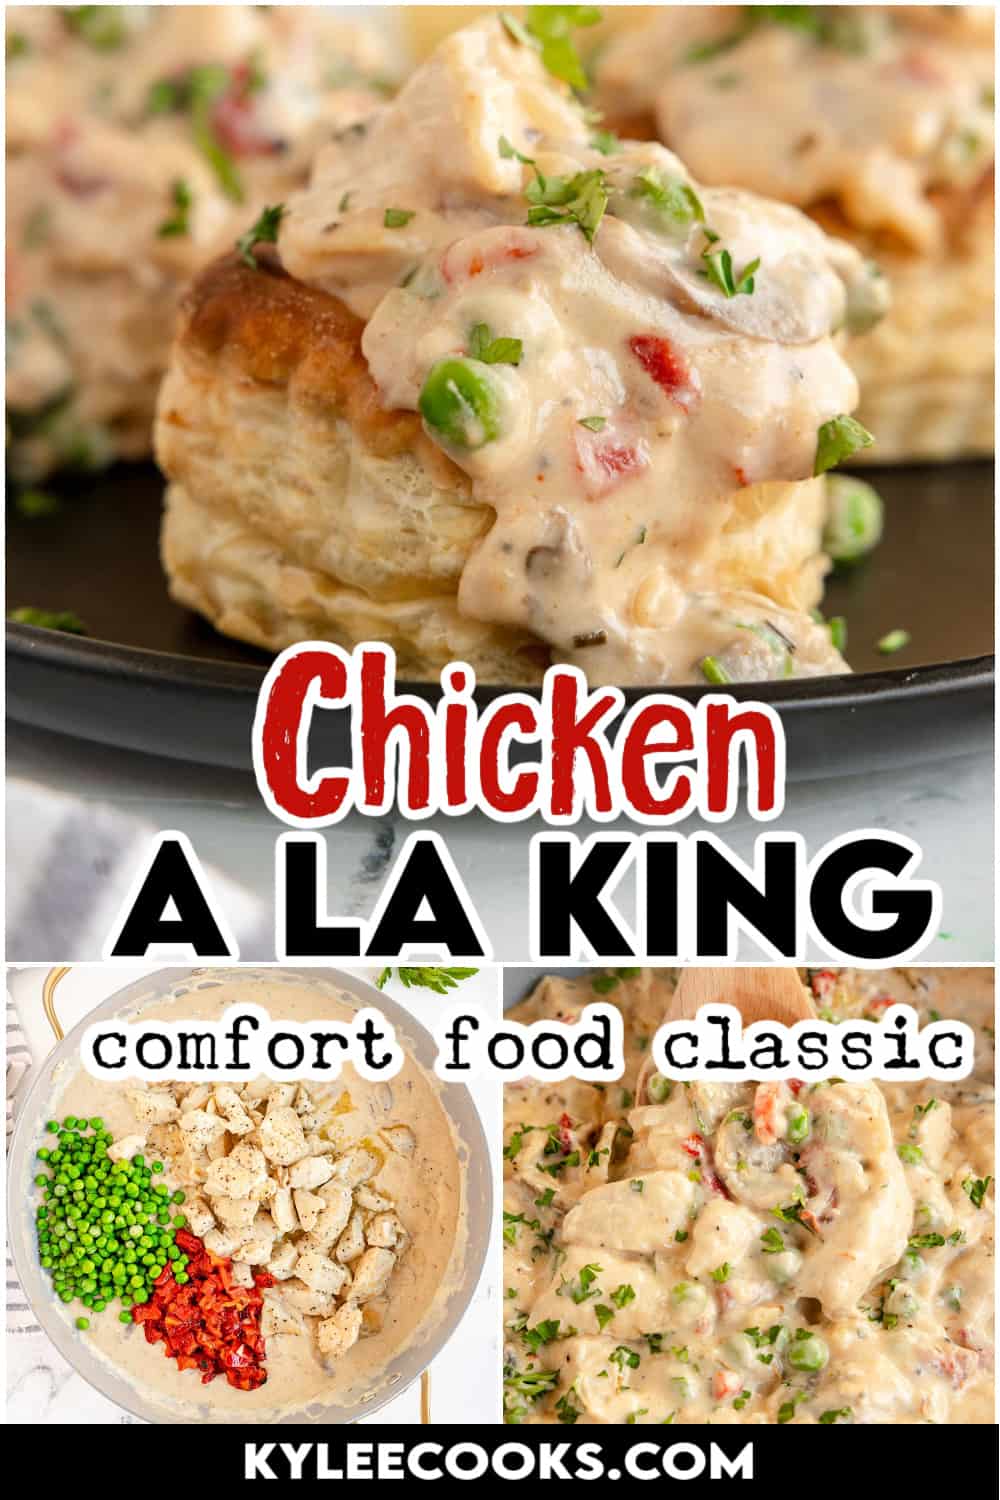 chicken a la king, on a pastry case with recipe name overlaid in text.